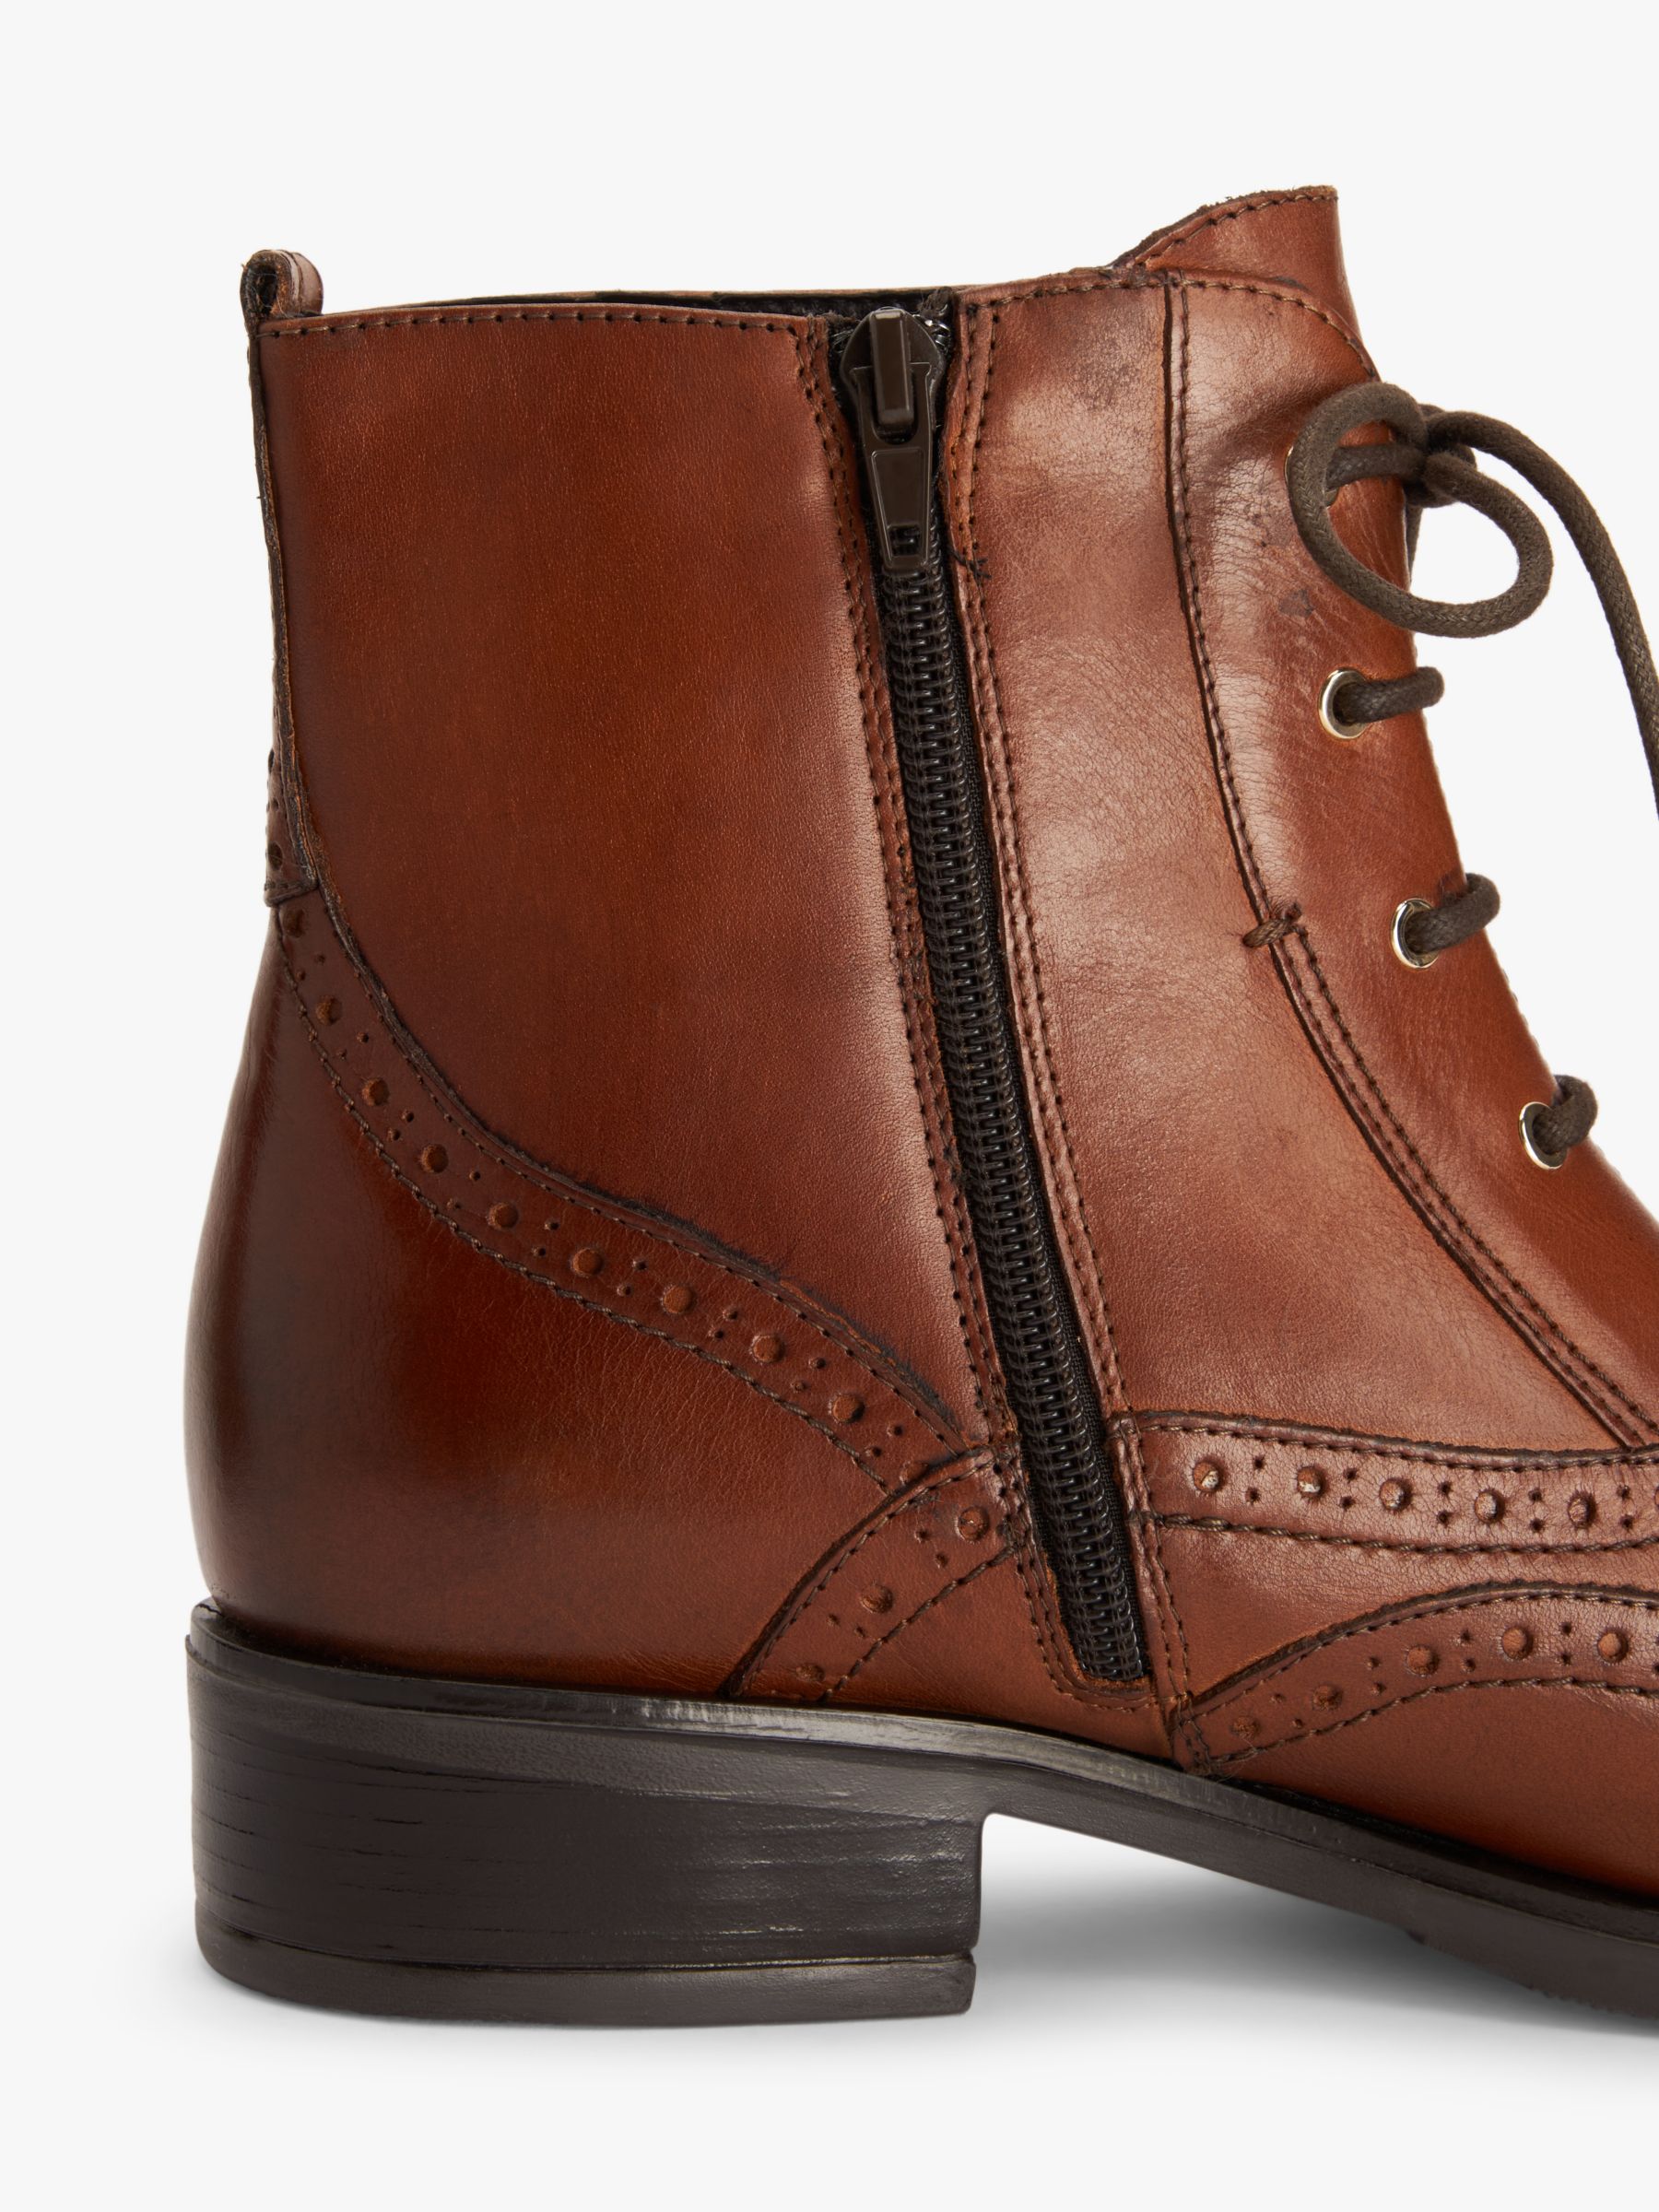 Buy John Lewis Camie Leather Brogue Detail Lace Up Ankle Boots Online at johnlewis.com